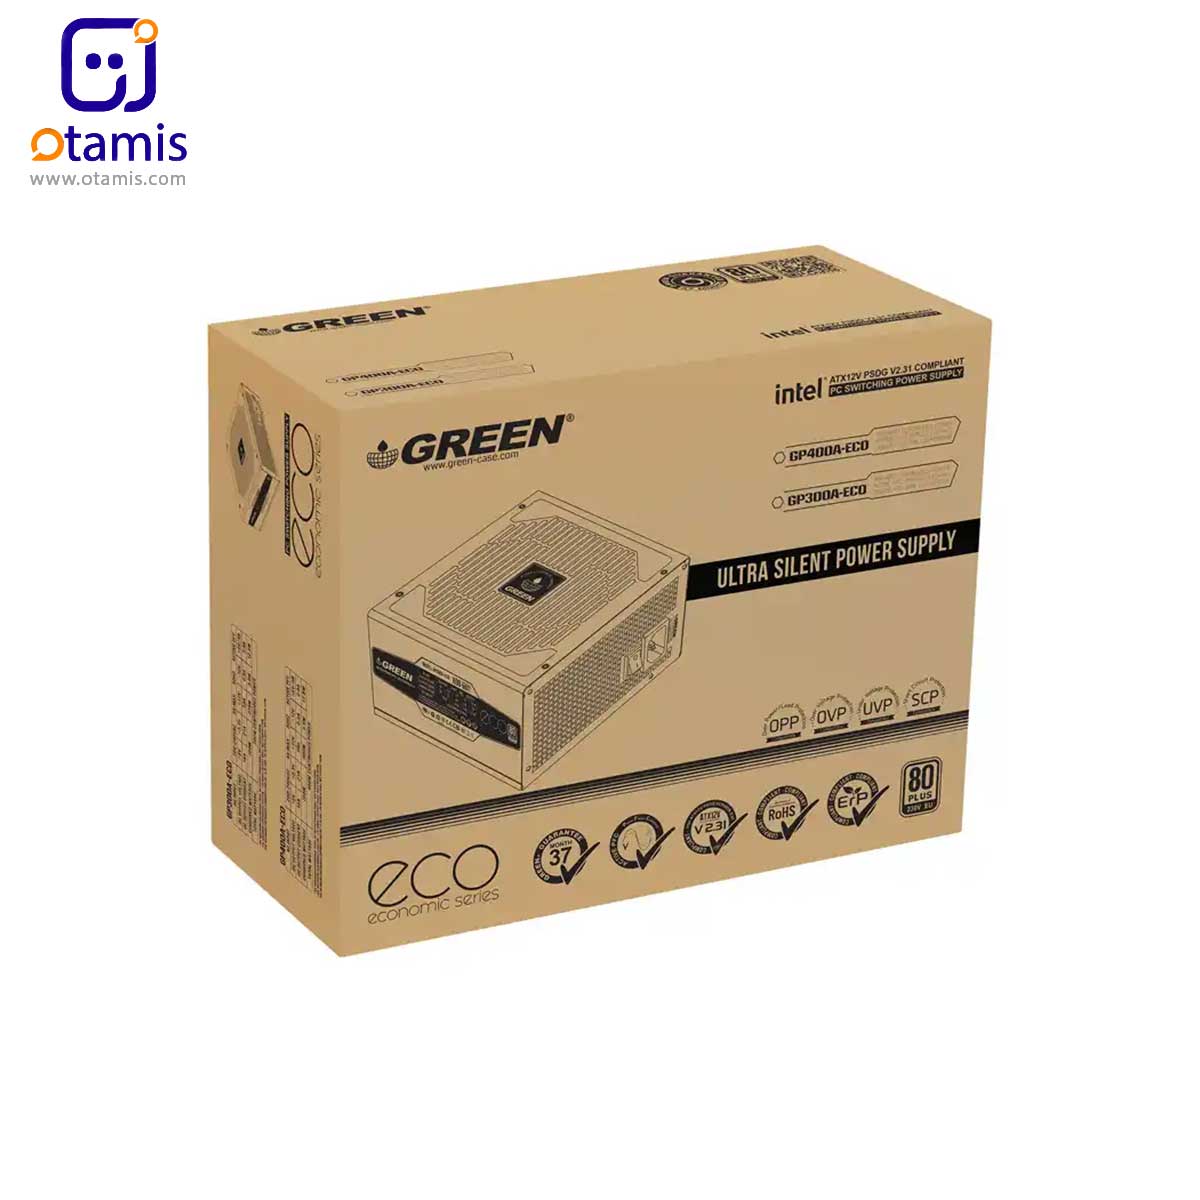 Green GP300A ECO Power Supply